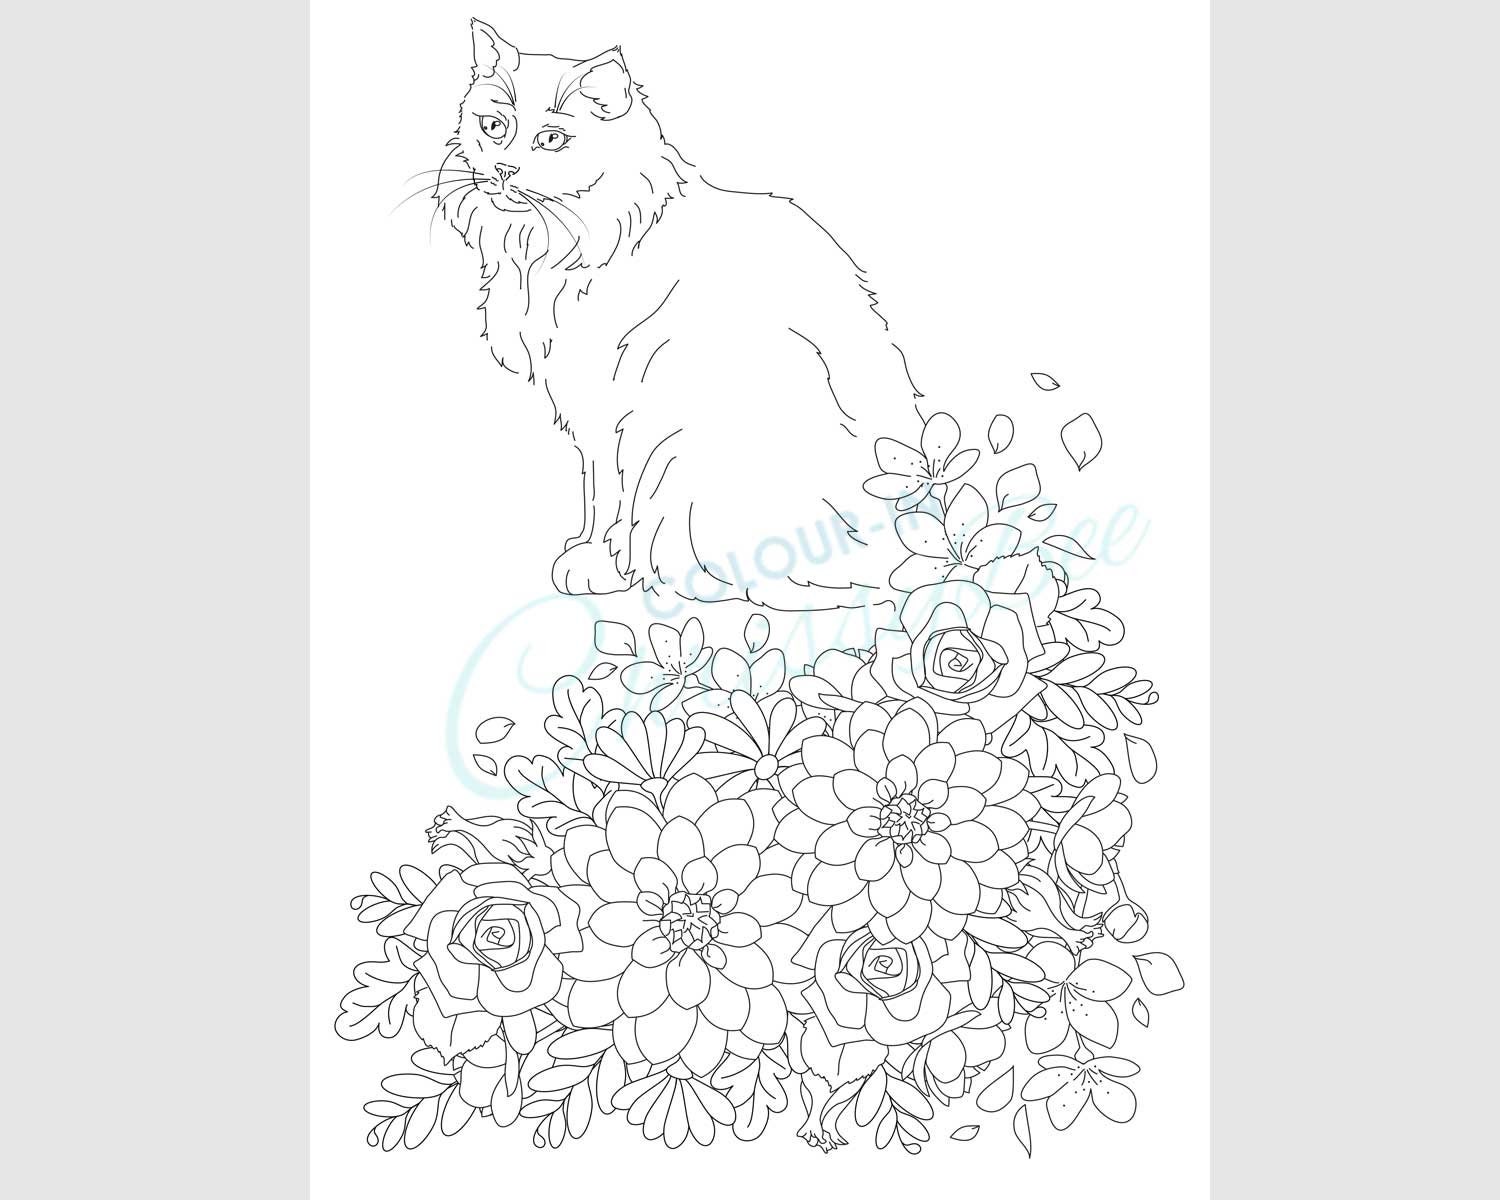 Girls Coloring Pages with Cats & Flowers Graphic by AnaSt